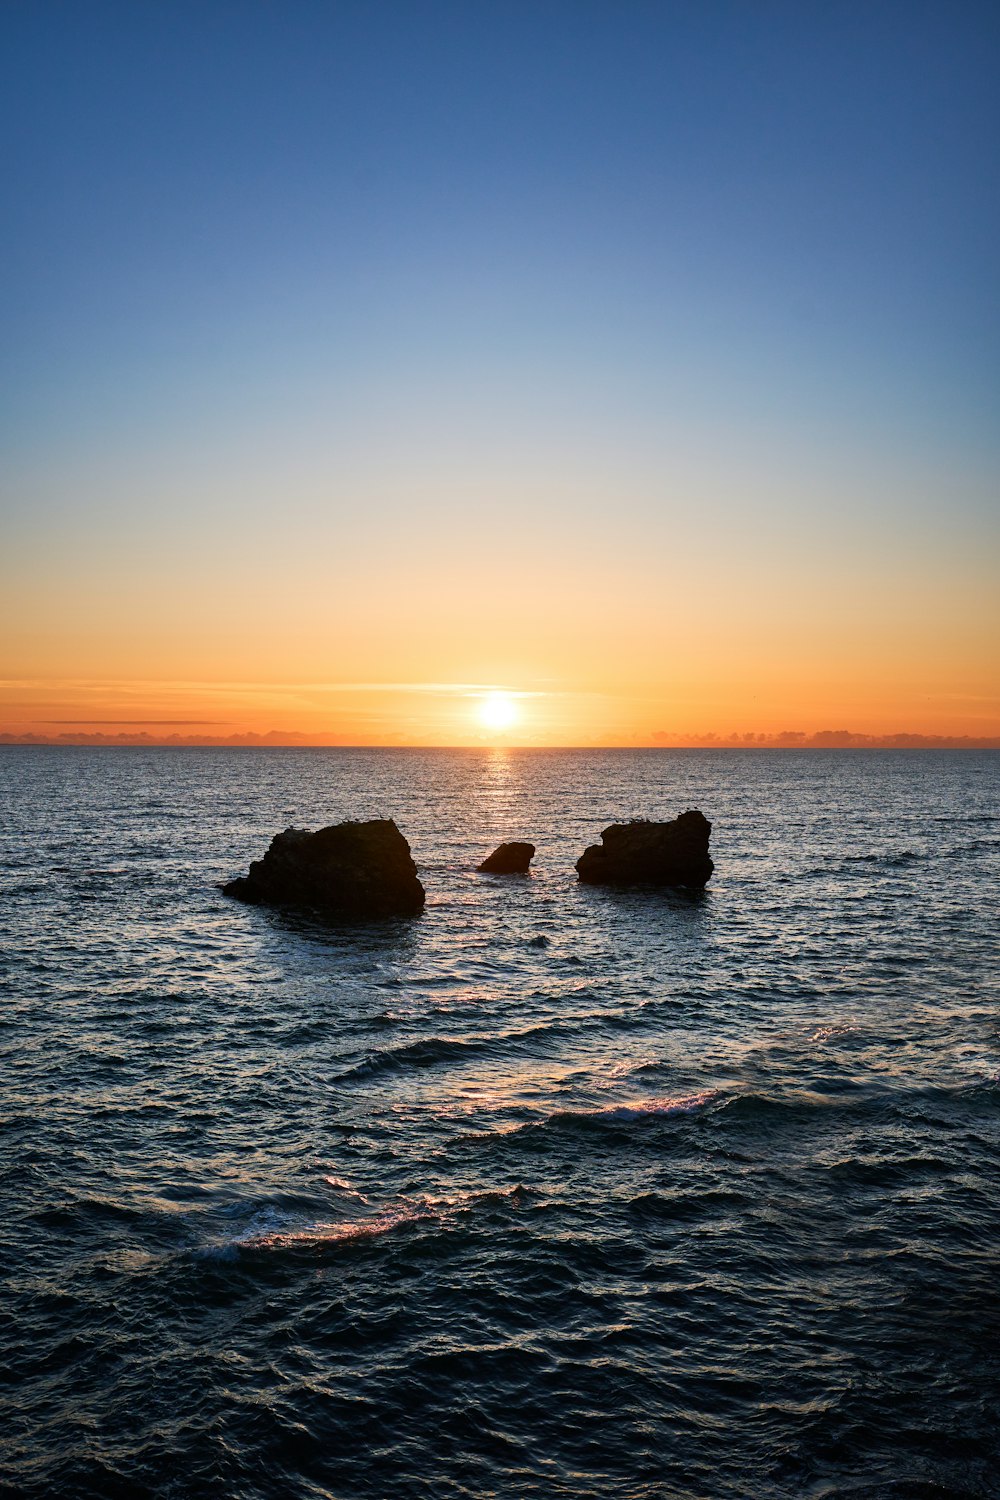 the sun is setting over the ocean with rocks in the water